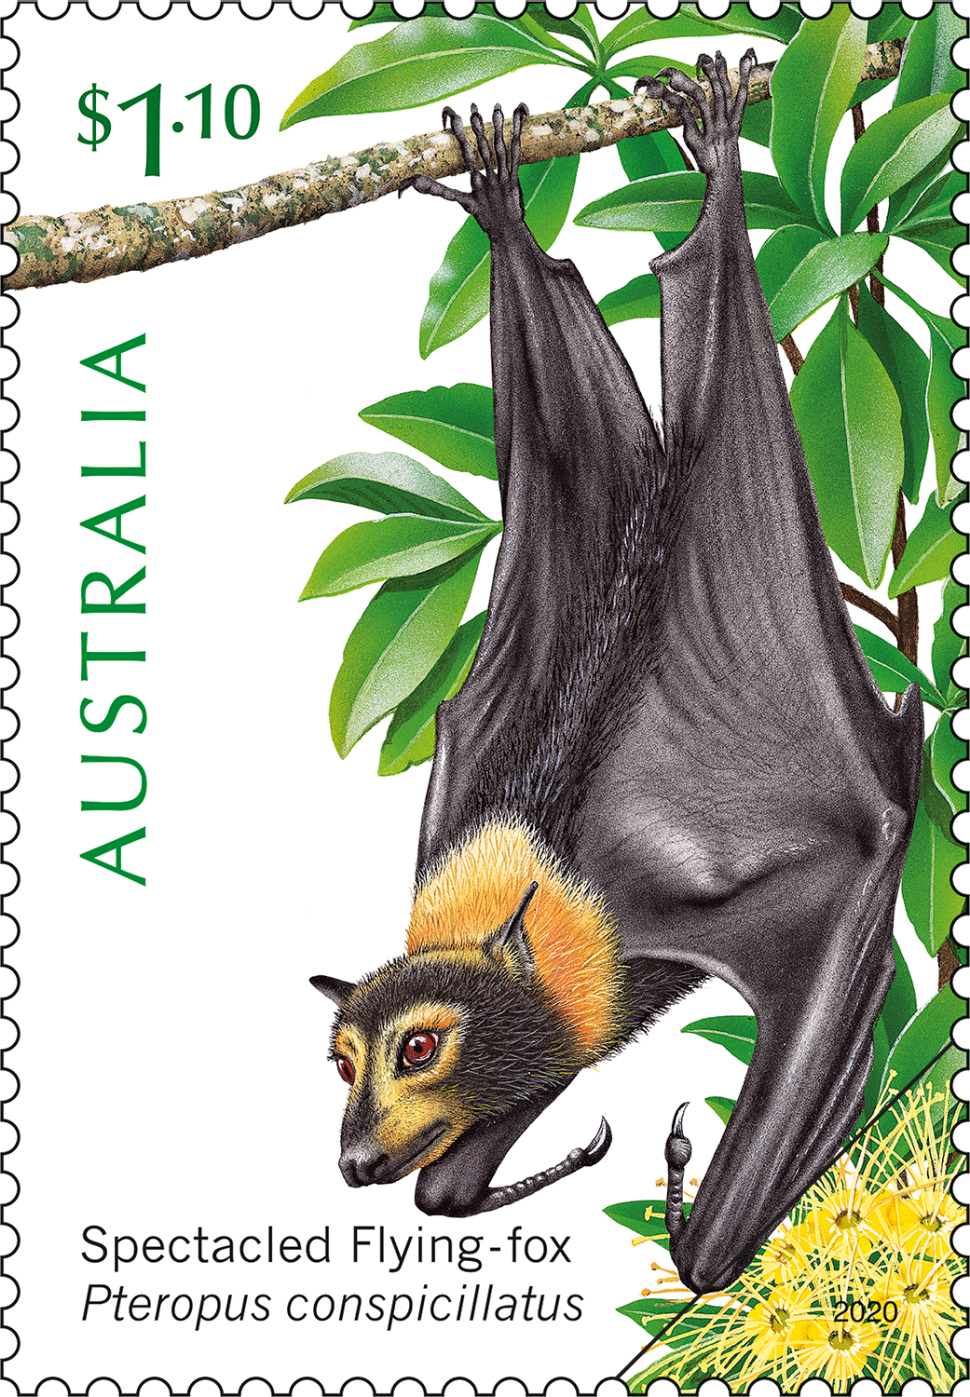 $1.10 - Spectacled Flying-fox